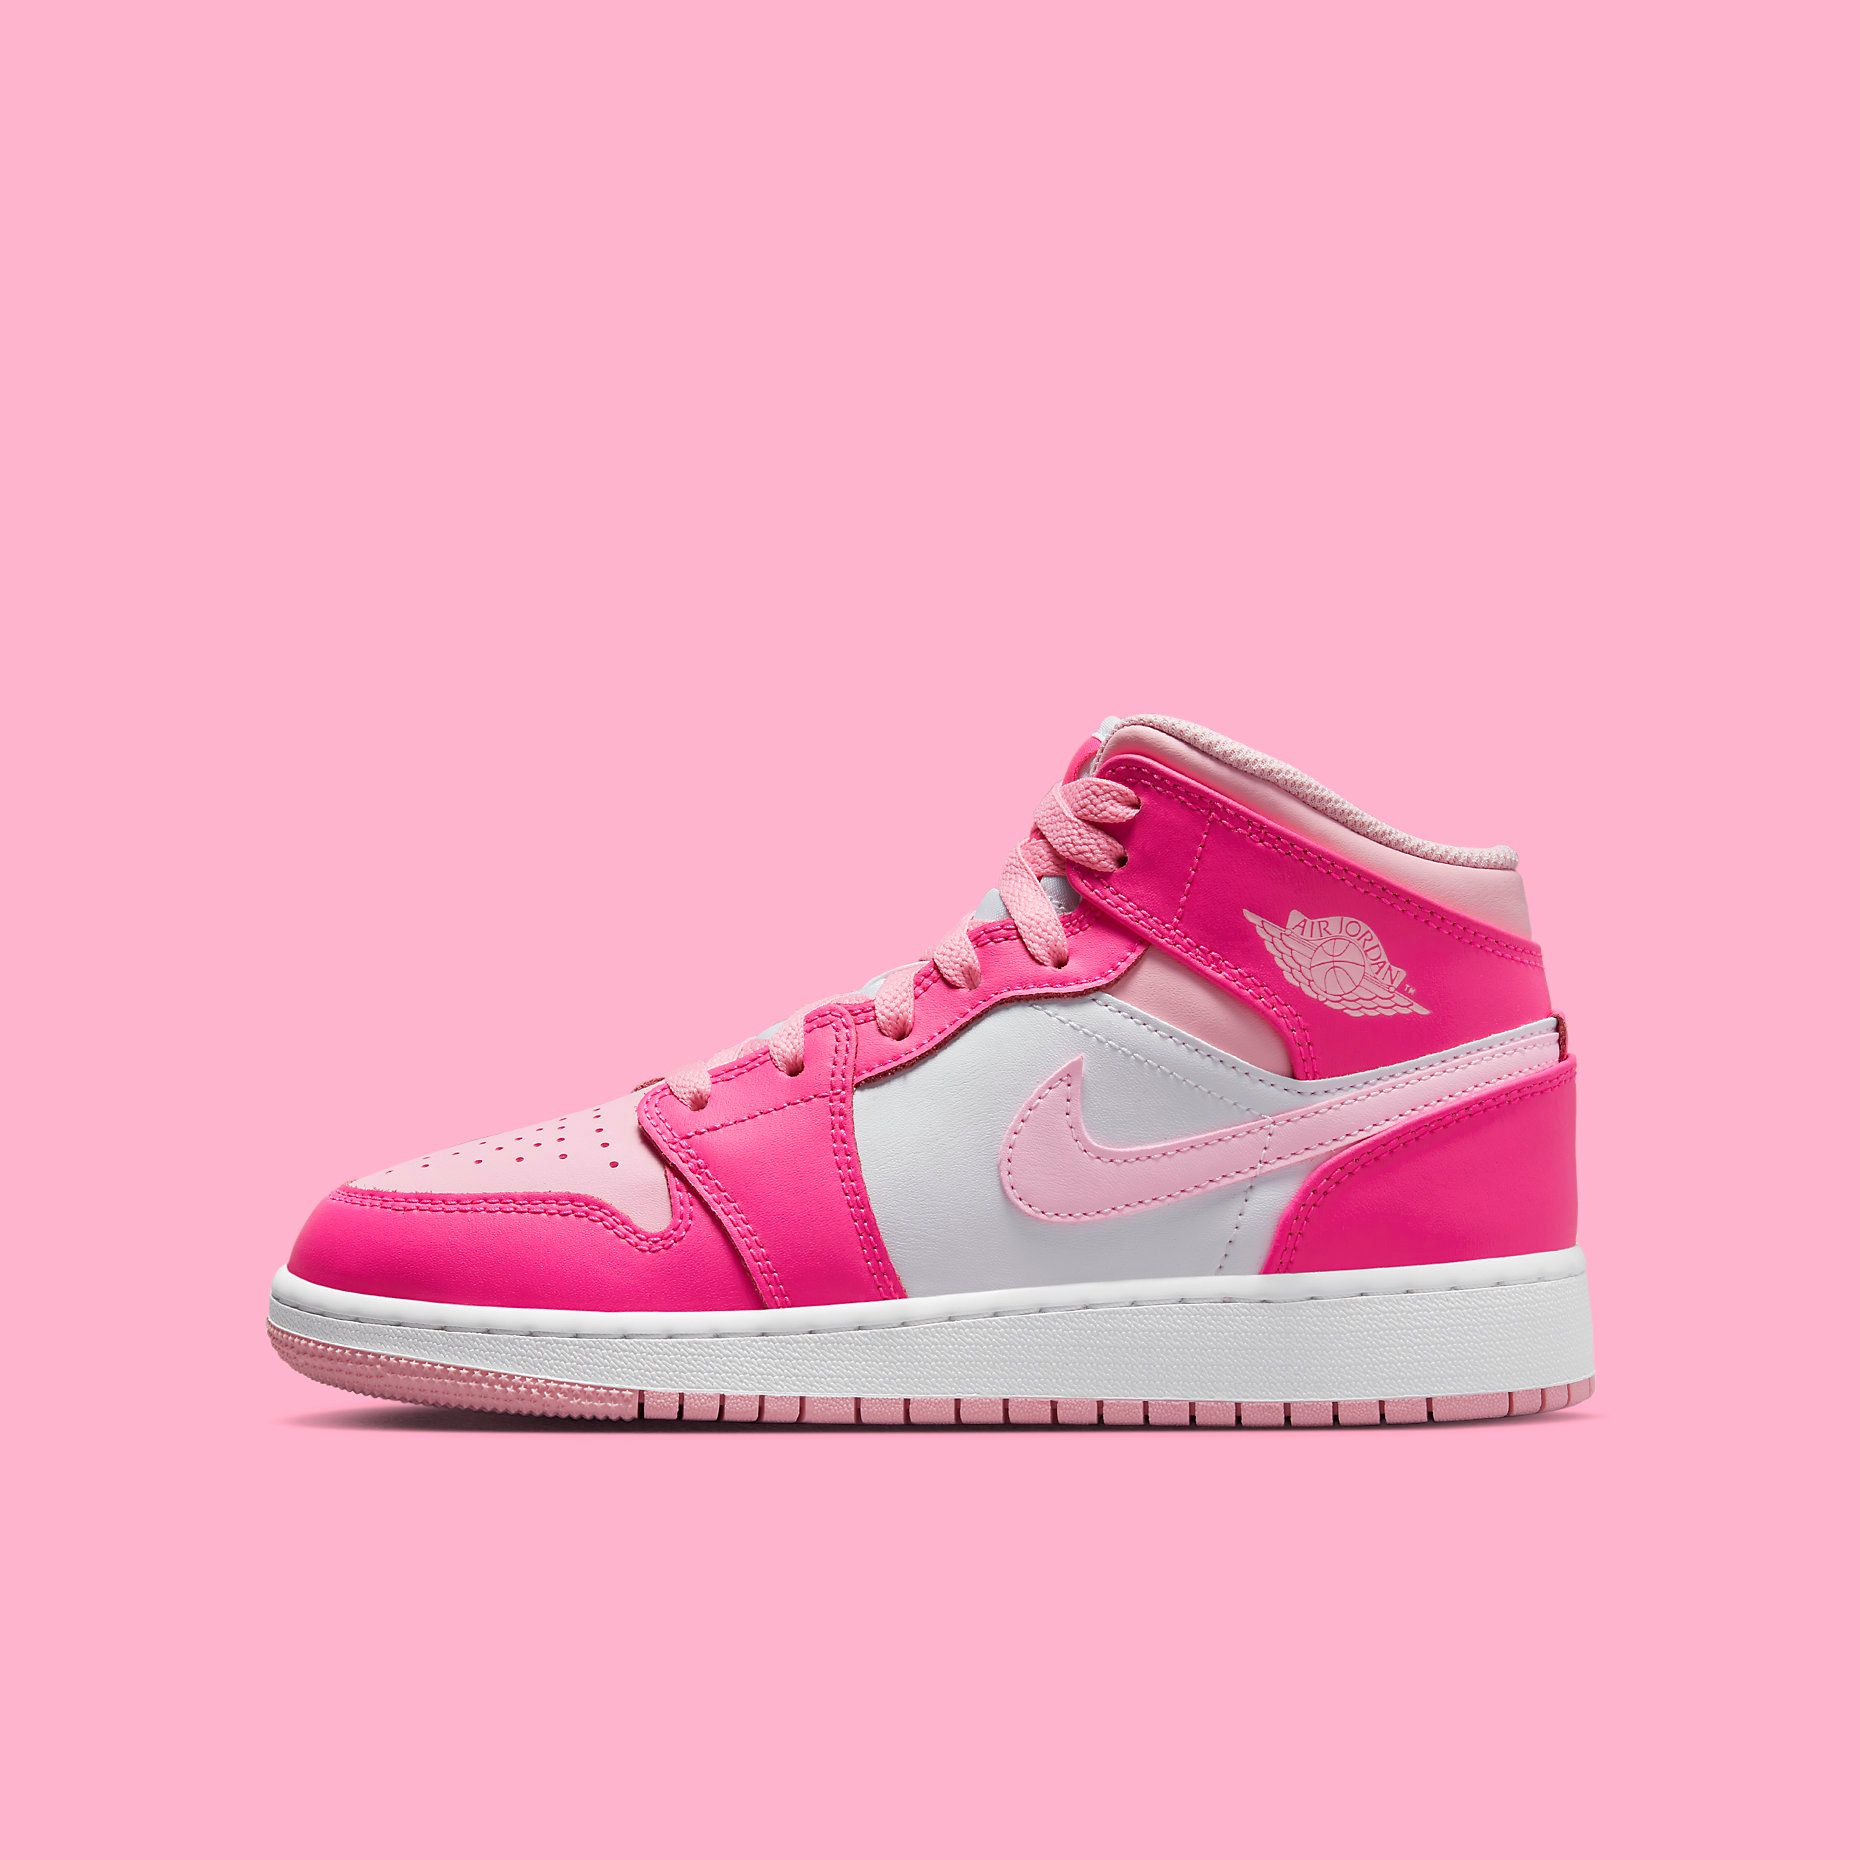 Official Images // Air Jordan 1 Mid “Medium Soft Pink” | House of